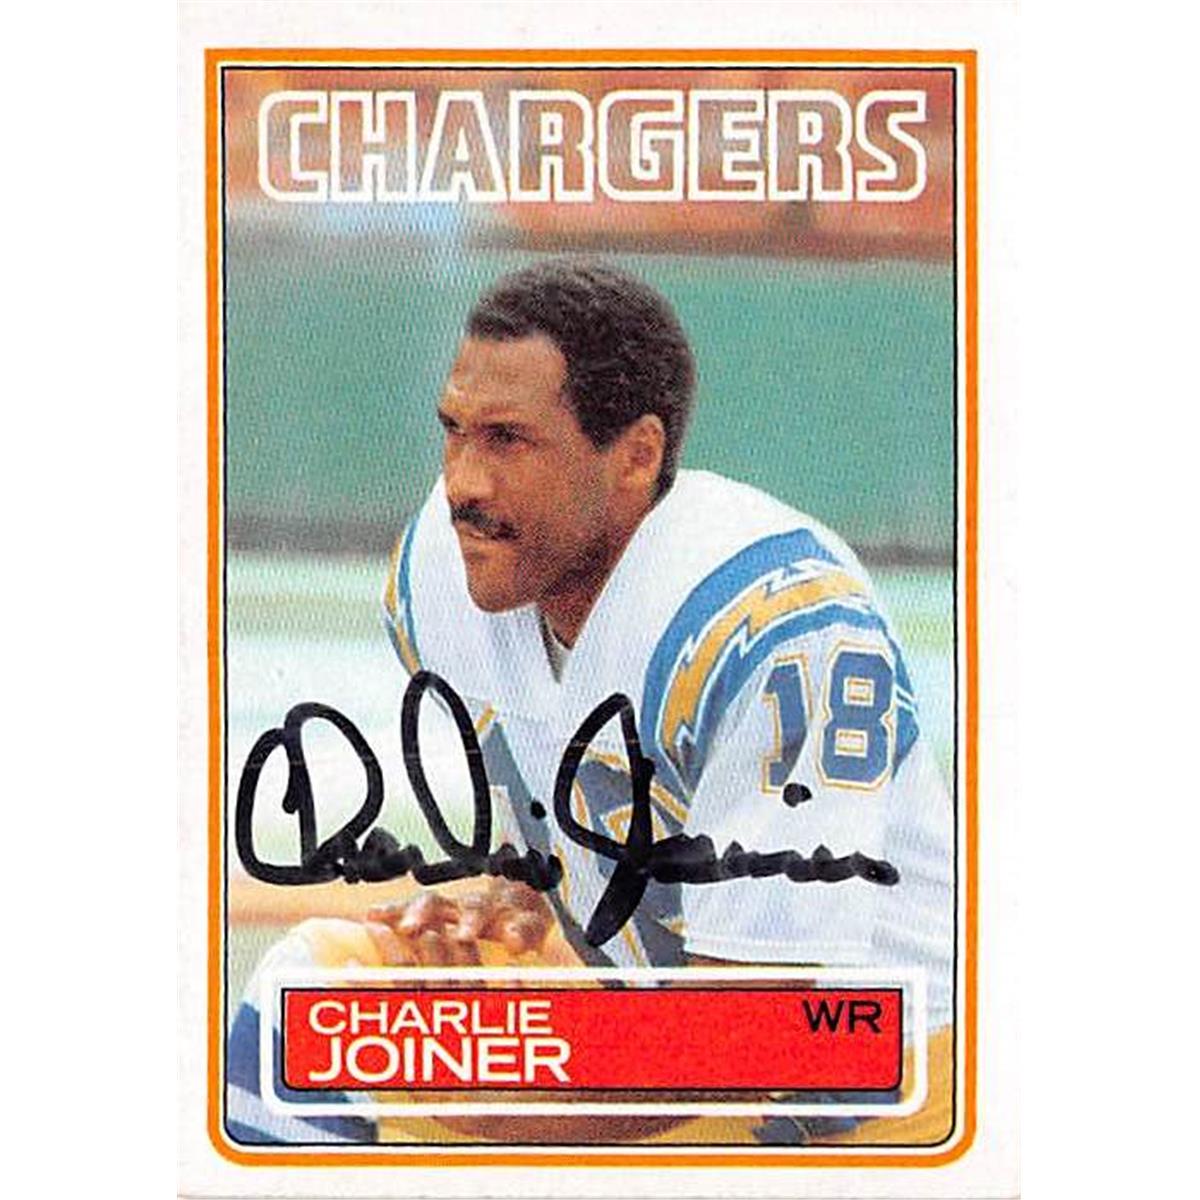 Picture of Autograph Warehouse 377255 Charlie Joiner Autographed Football Card - San Diego Chargers Hall of Famer 1983 Topps No.377